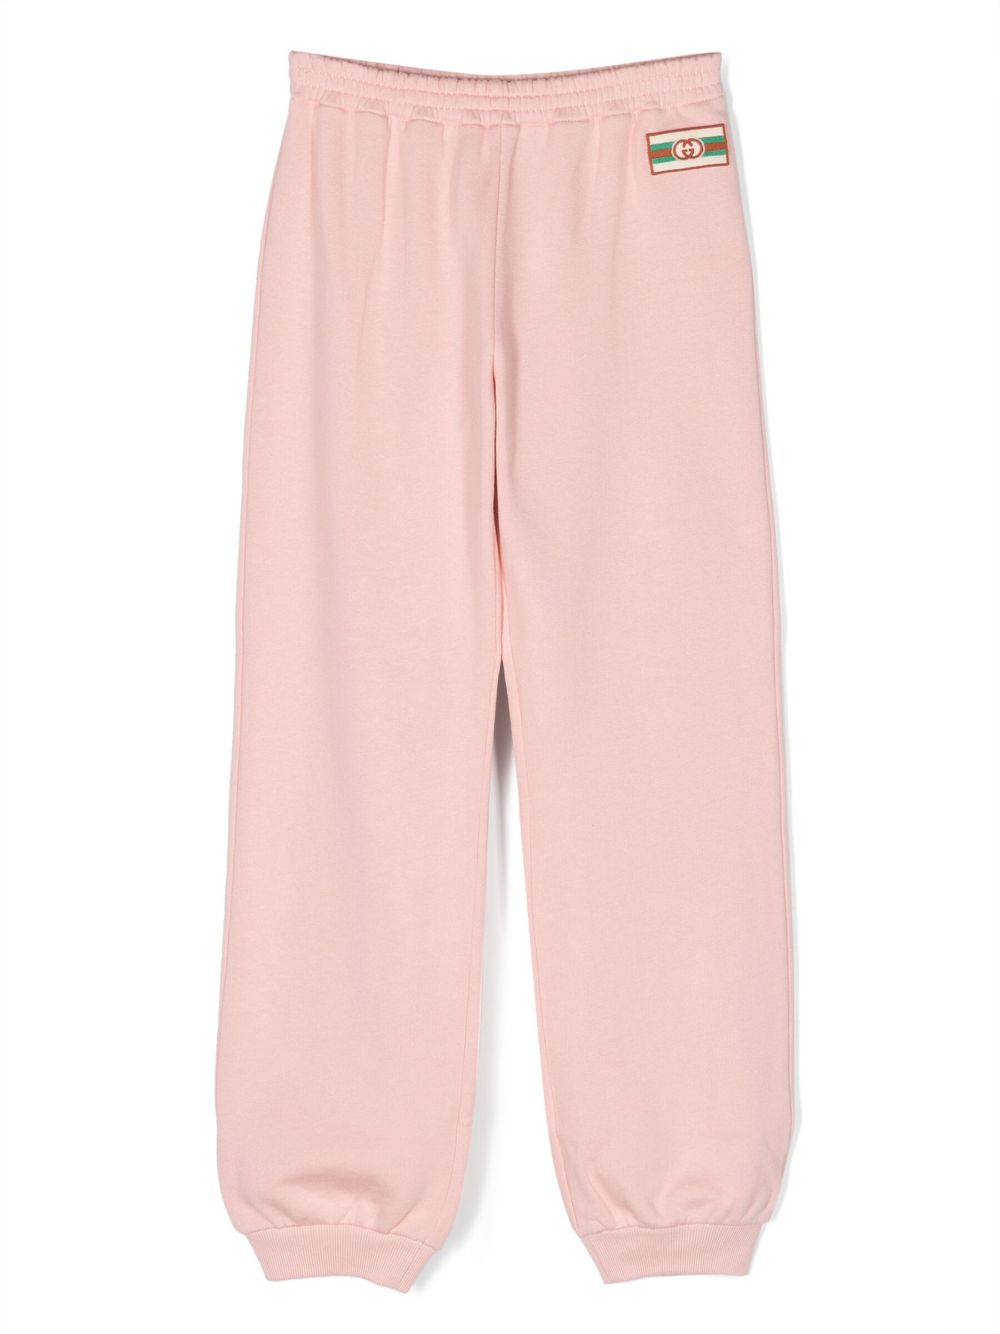 Pink sports trousers for girls